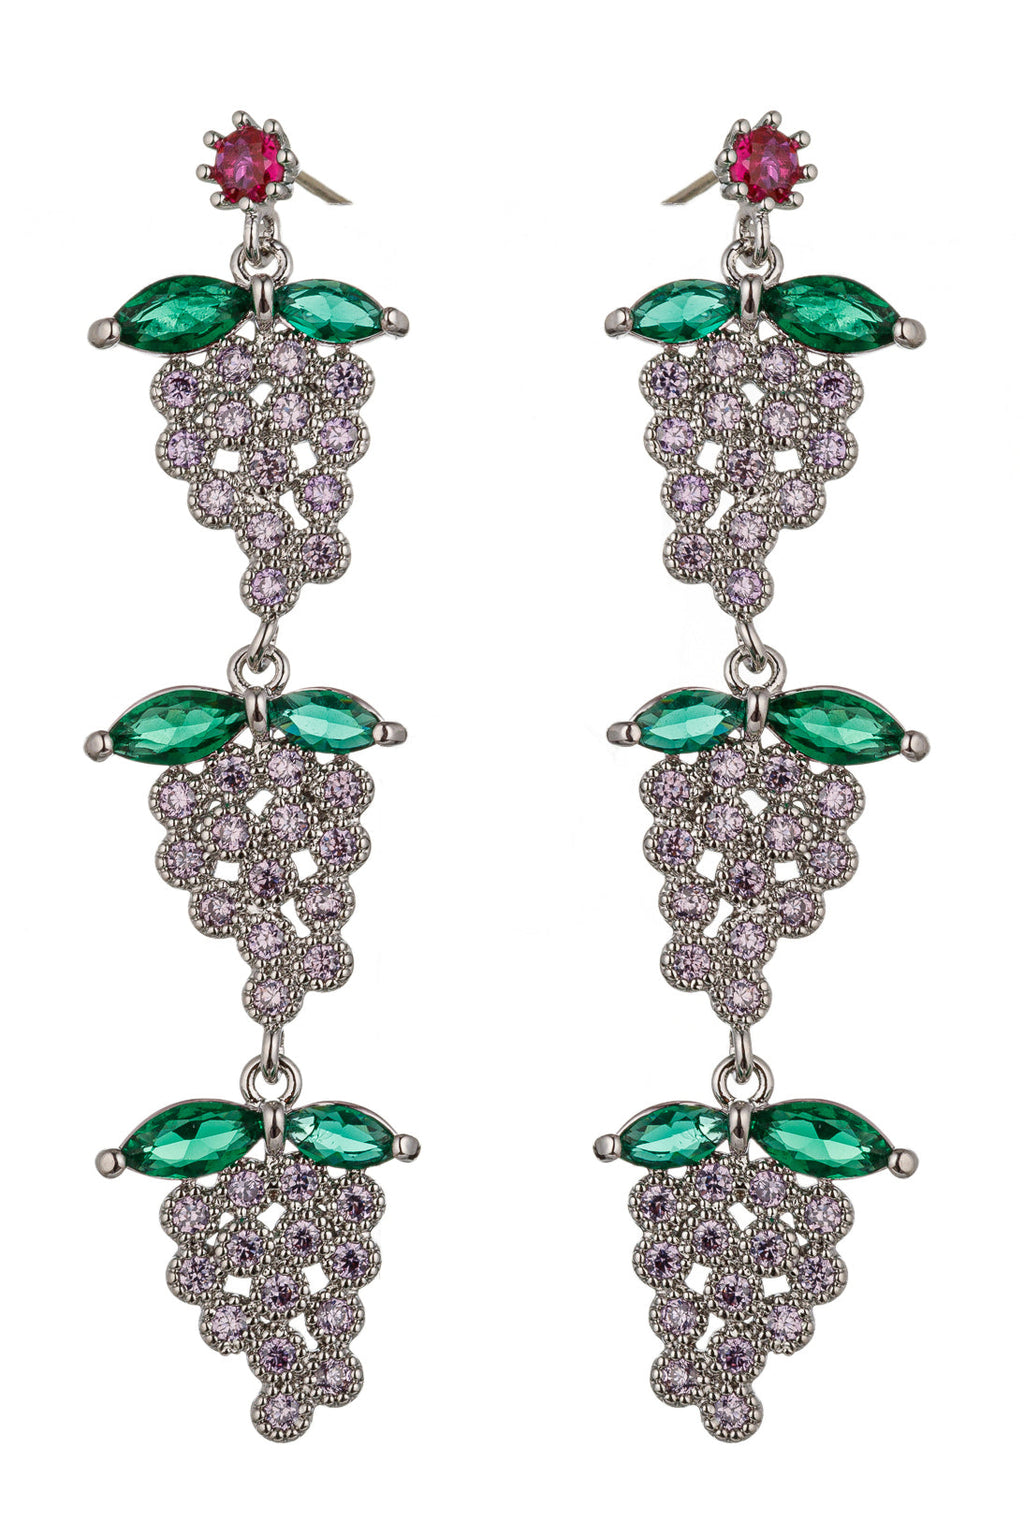 Add a touch of luxury with these drop earrings featuring lustrous purple grape-hued cubic zirconia stones, a statement of elegance.